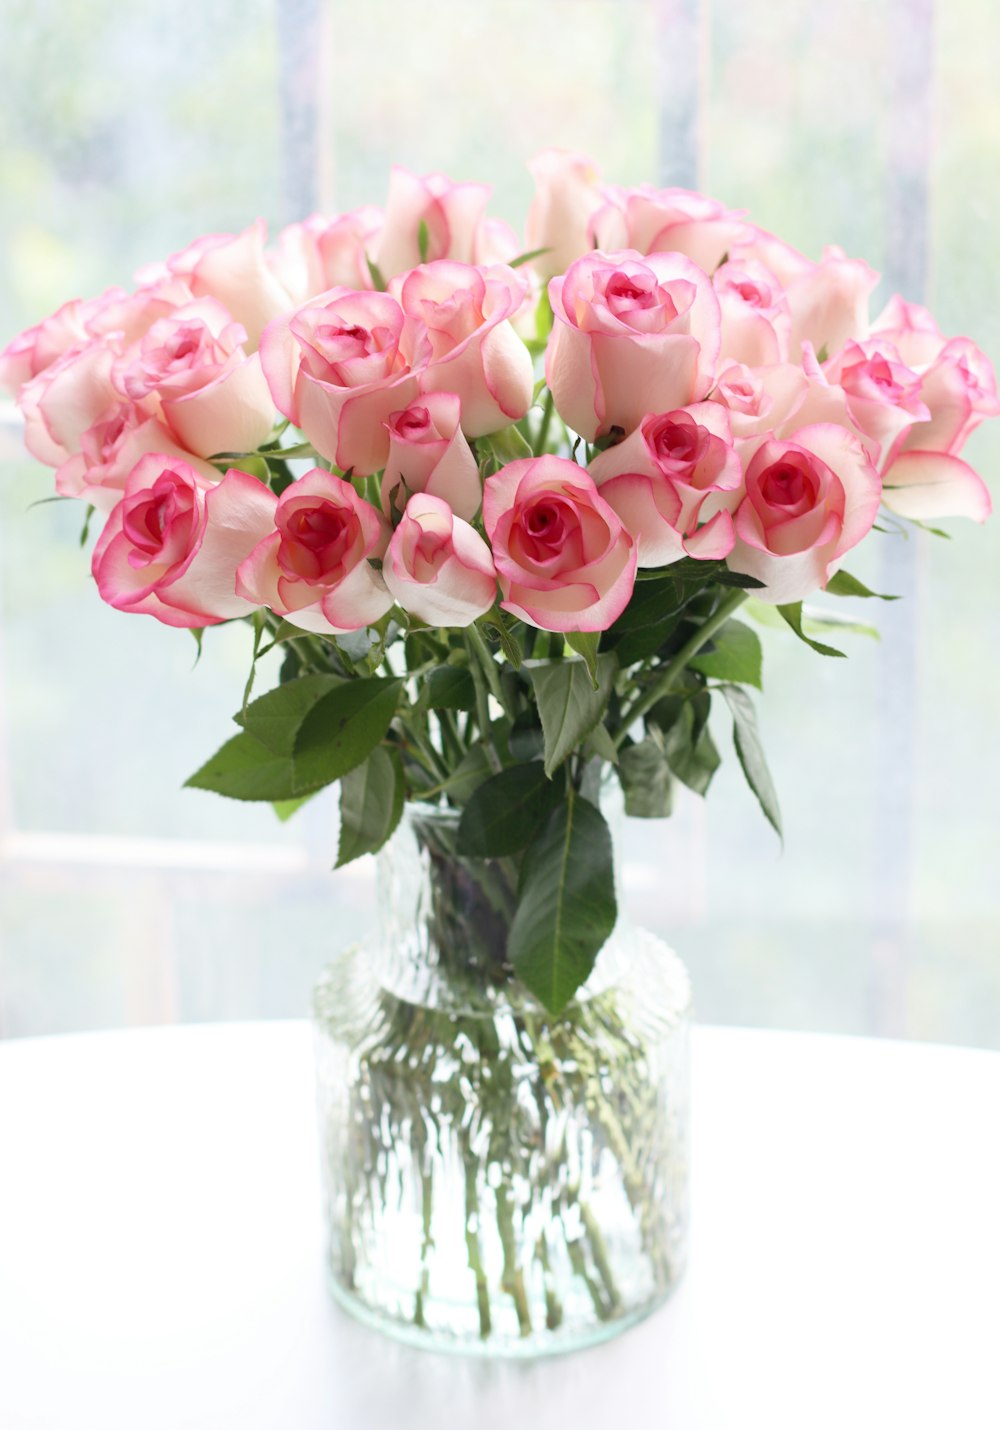 a vase filled with pink roses on a table